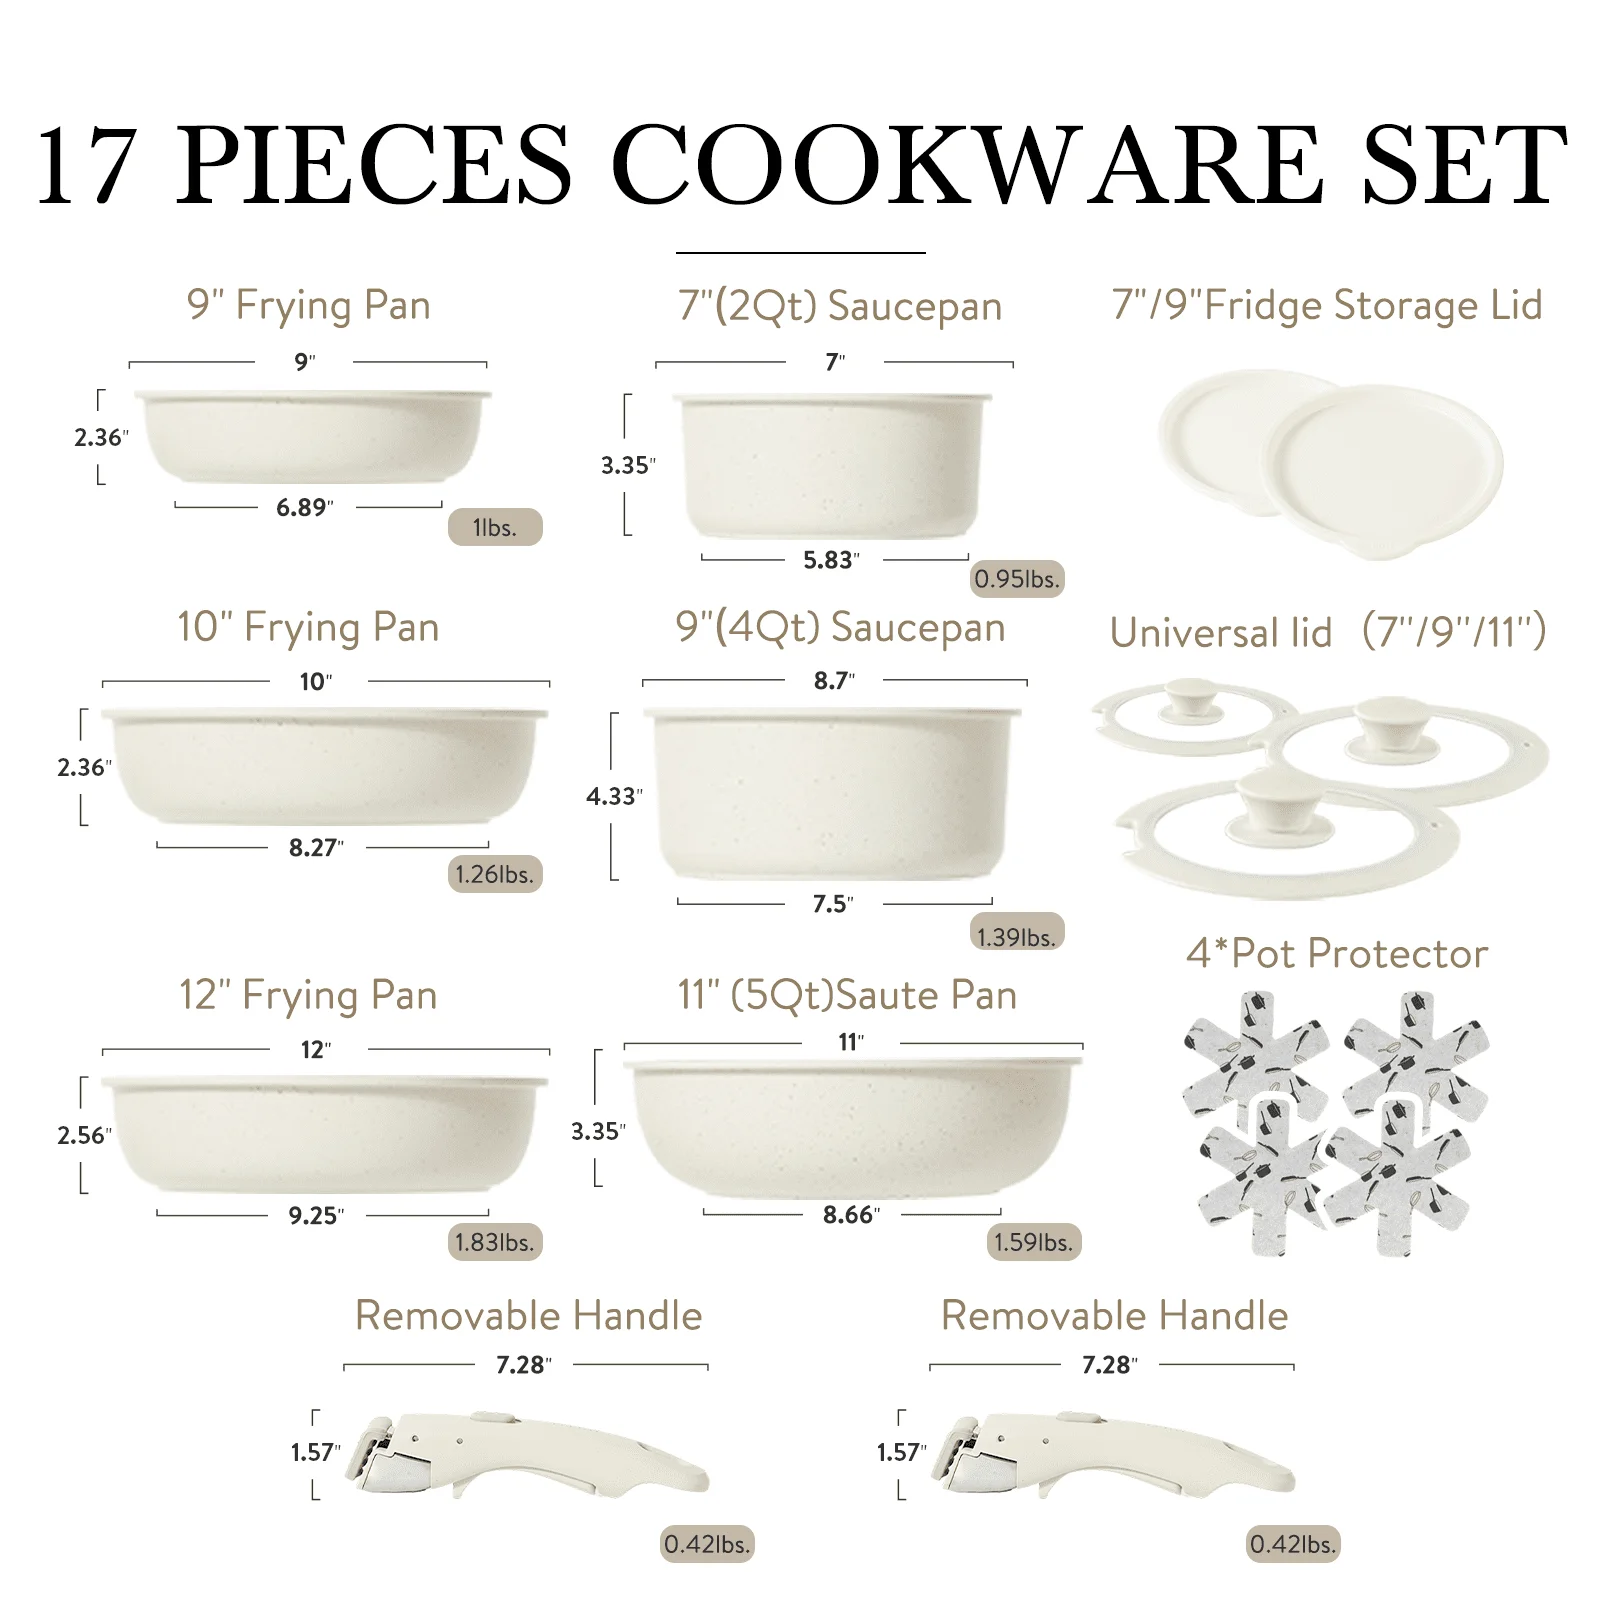 https://ae01.alicdn.com/kf/Sadad5b523eb144d0ad89be6a582eb04ae/Dream-House-Nonstick-Cookware-Sets-8-Pcs-Granite-Non-Stick-Pots-and-Pans-Set-with-Removable.jpg